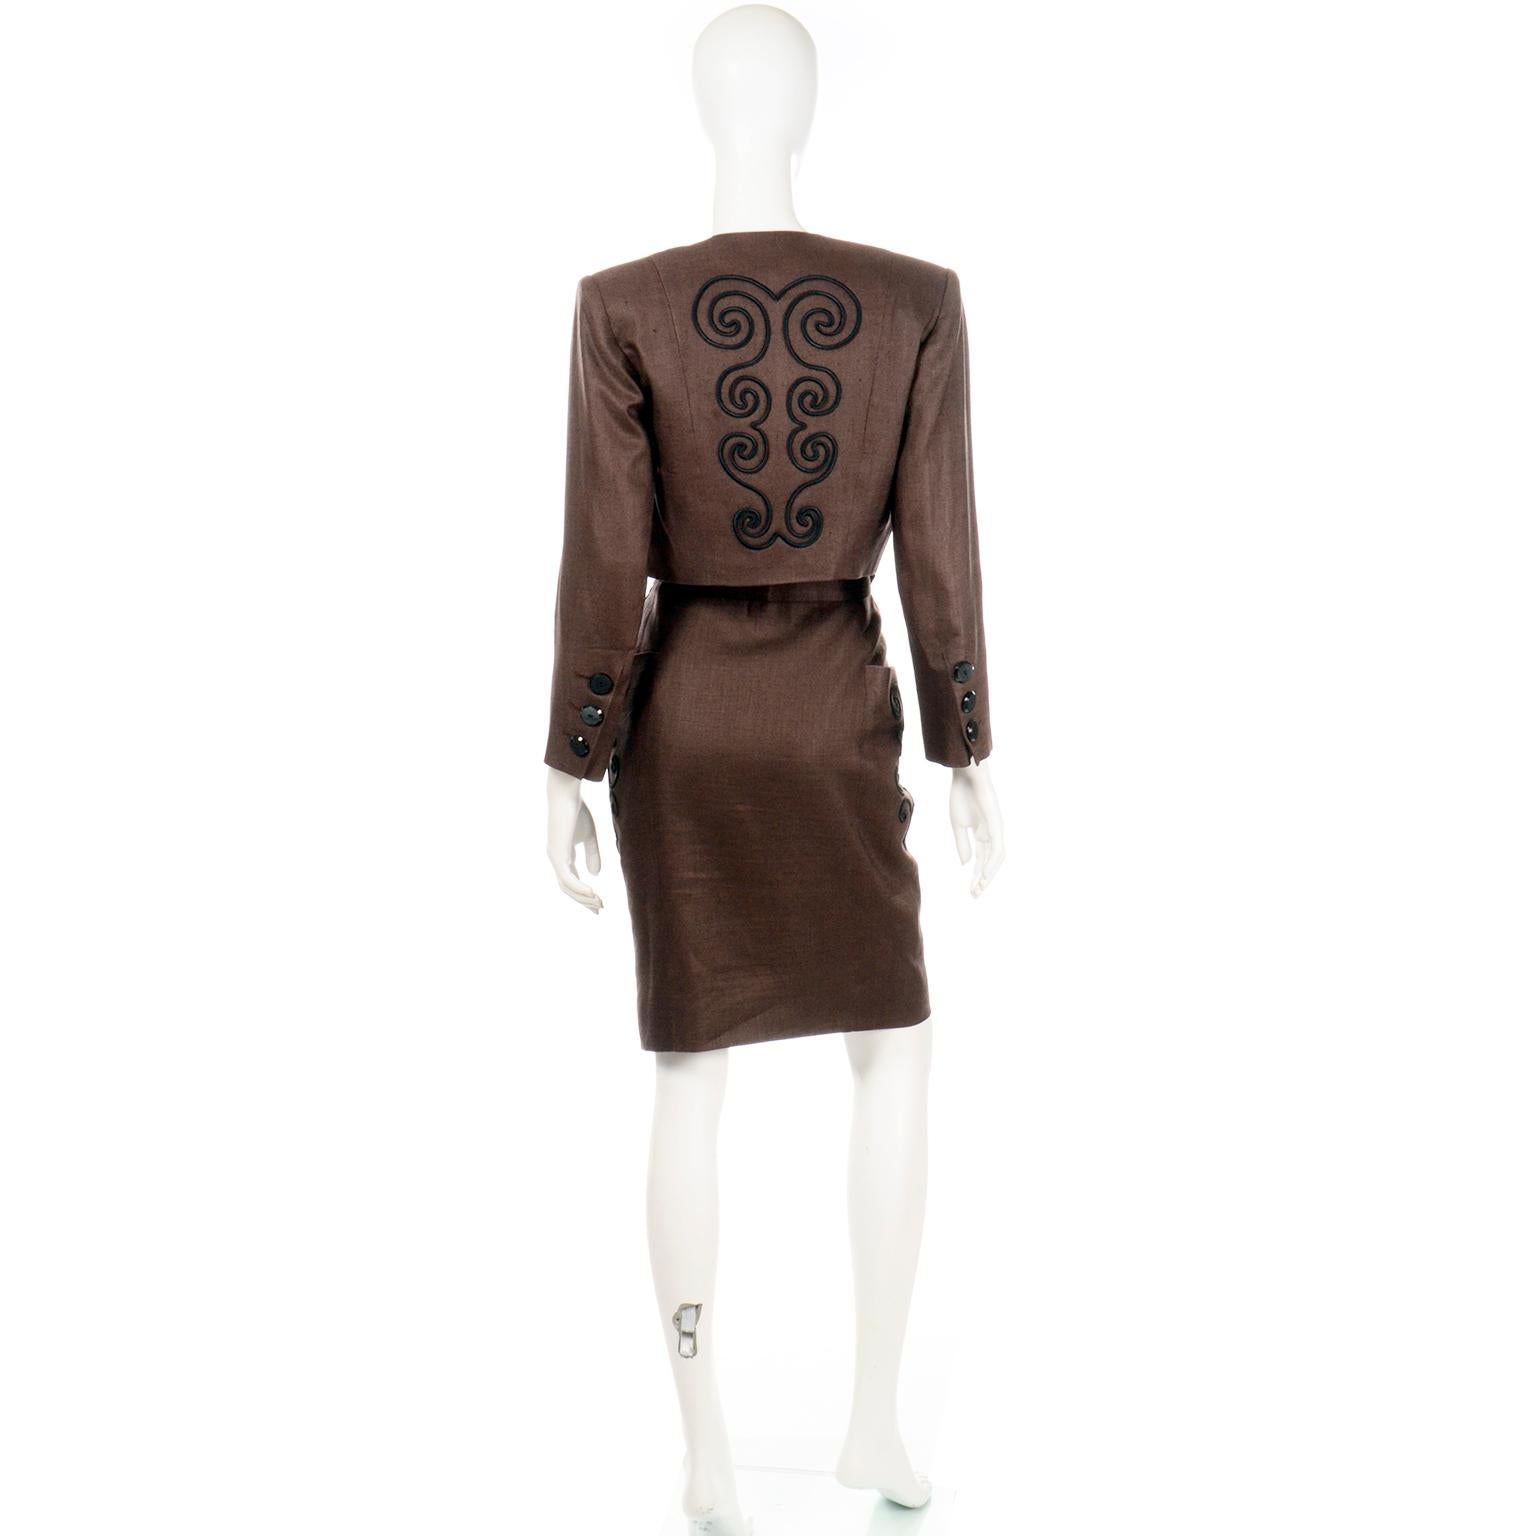 This is a 1980's vintage Yves Saint Laurent 2 piece brown linen jacket and skirt suit. The luxe brown fabric feels like a rayon linen blend and has brown lining and black buttons. We especially love the detailed black soutache style embroidery trim